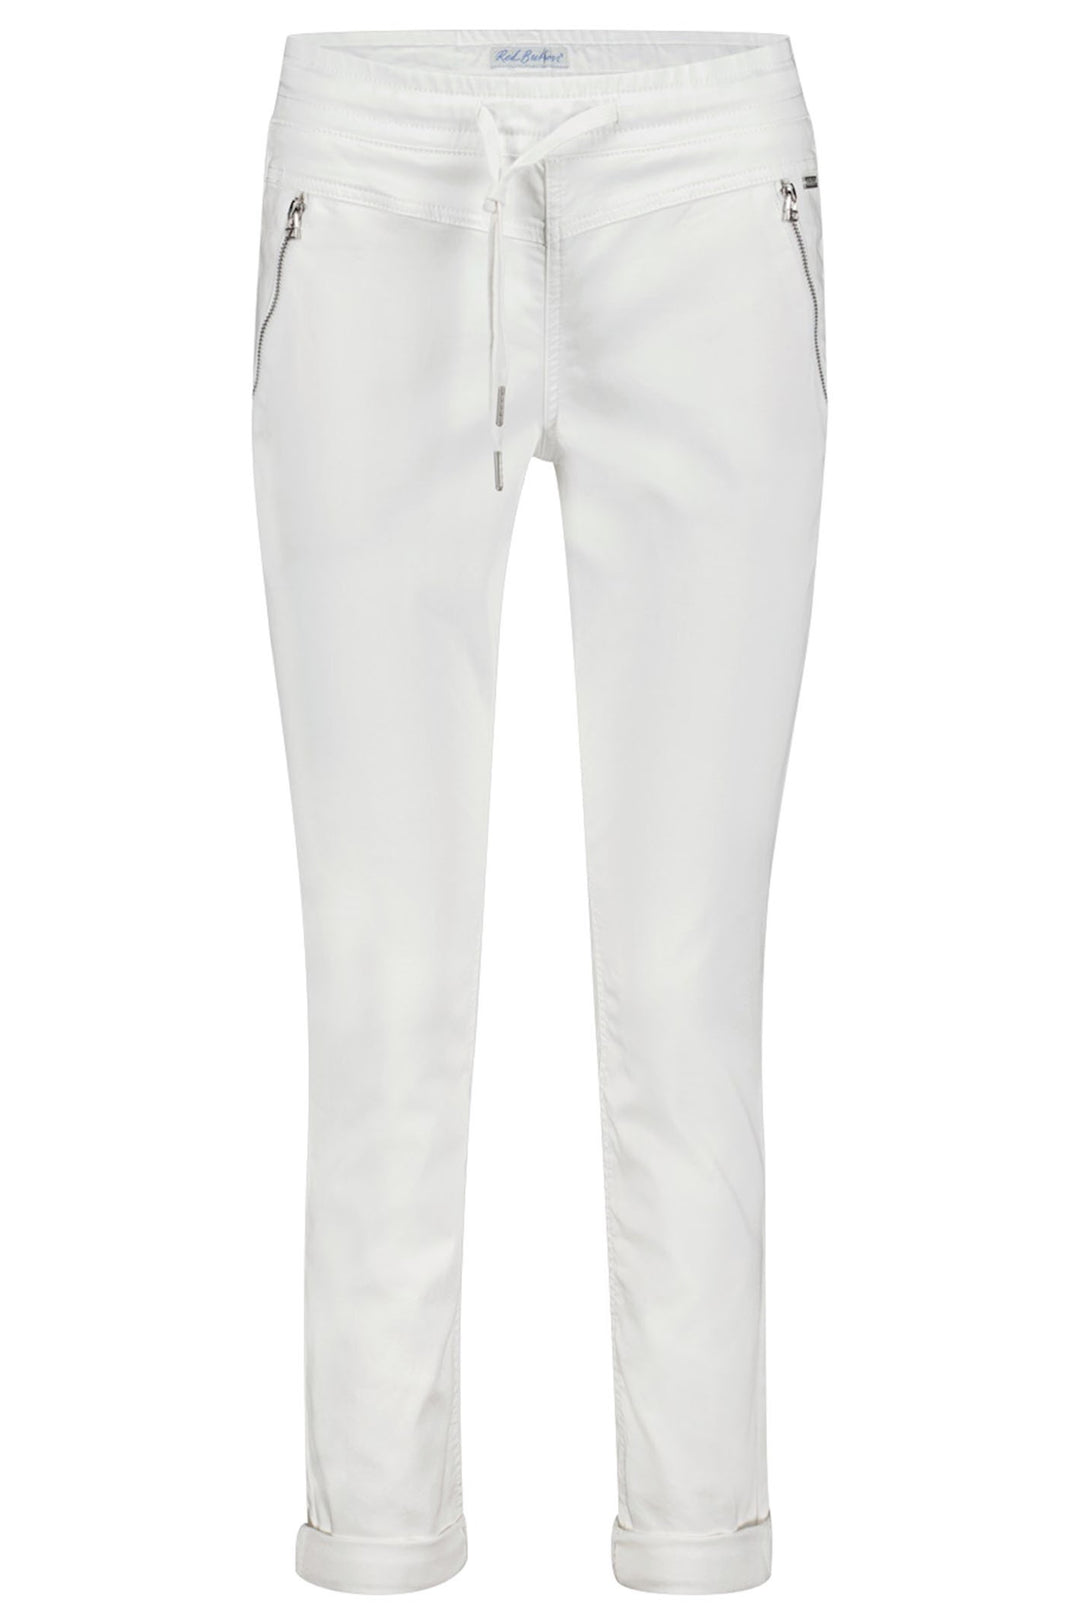 Red Button SRB3936 Tessy White Crop Jogger Trousers - Dotique